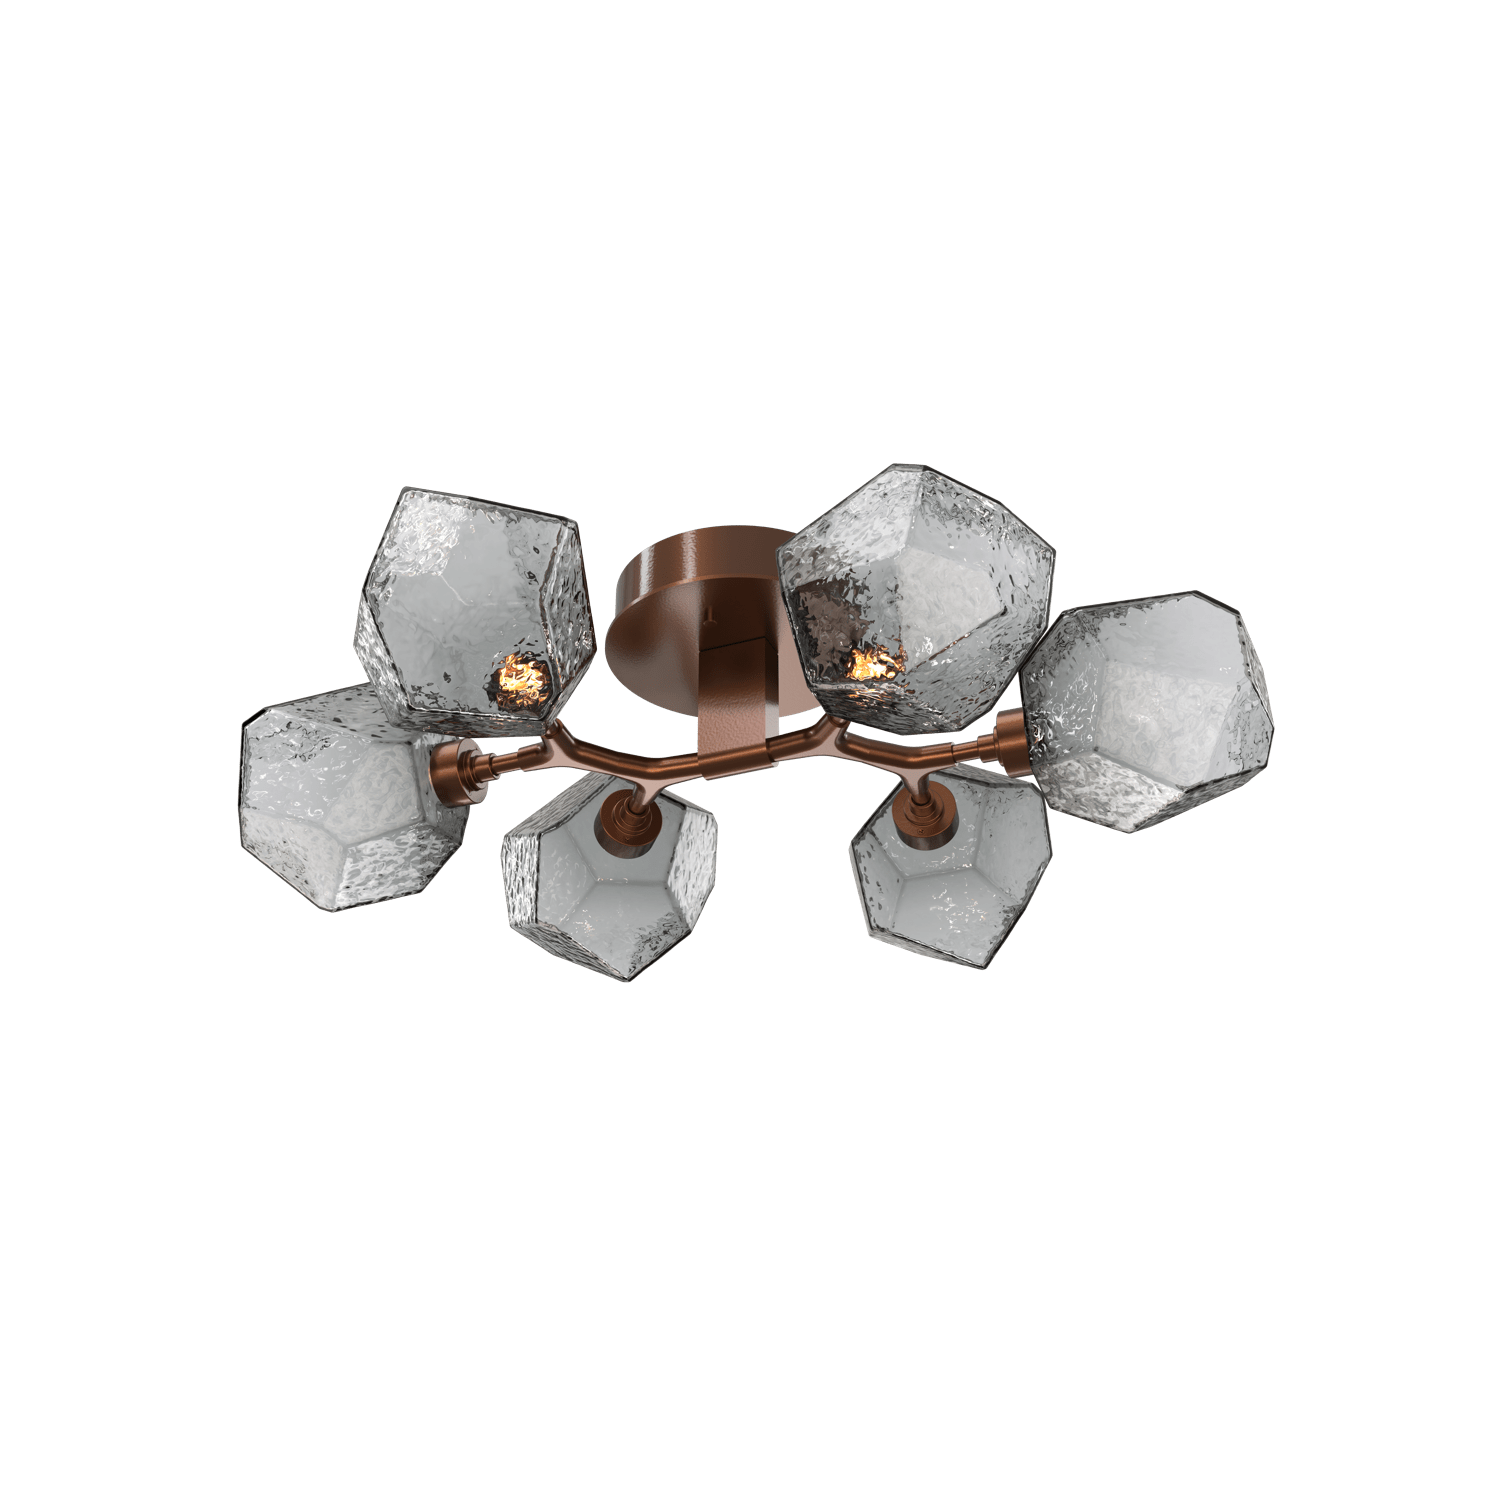 CLB0039-01-BB-S-Hammerton-Studio-Gem-6-light-organic-flush-mount-light-with-burnished-bronze-finish-and-smoke-blown-glass-shades-and-LED-lamping